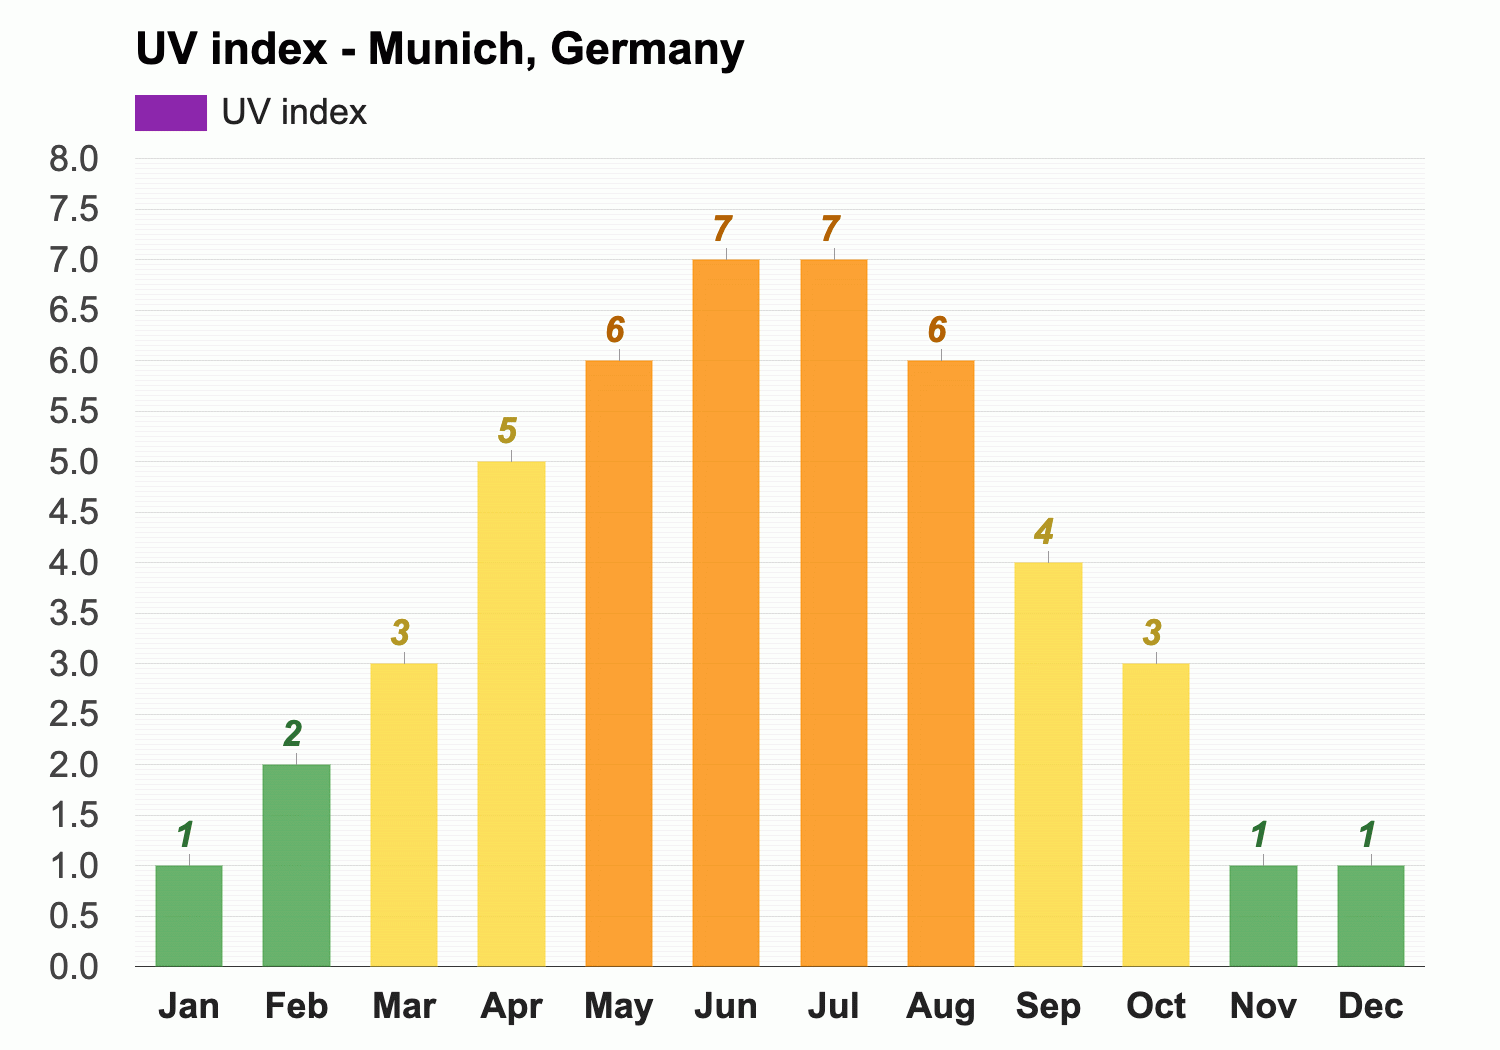 Munich, Germany - May weather forecast and climate information | Weather  Atlas